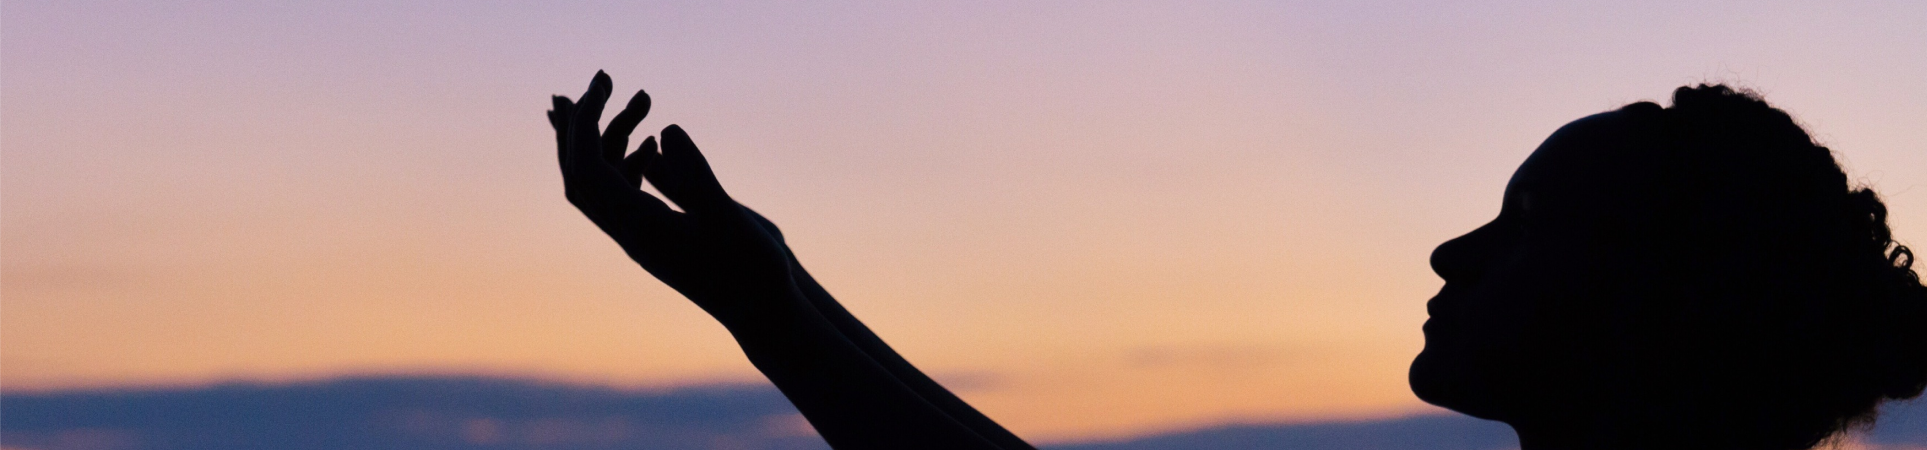 Silhouette of a person with raised hand against a sunset sky.